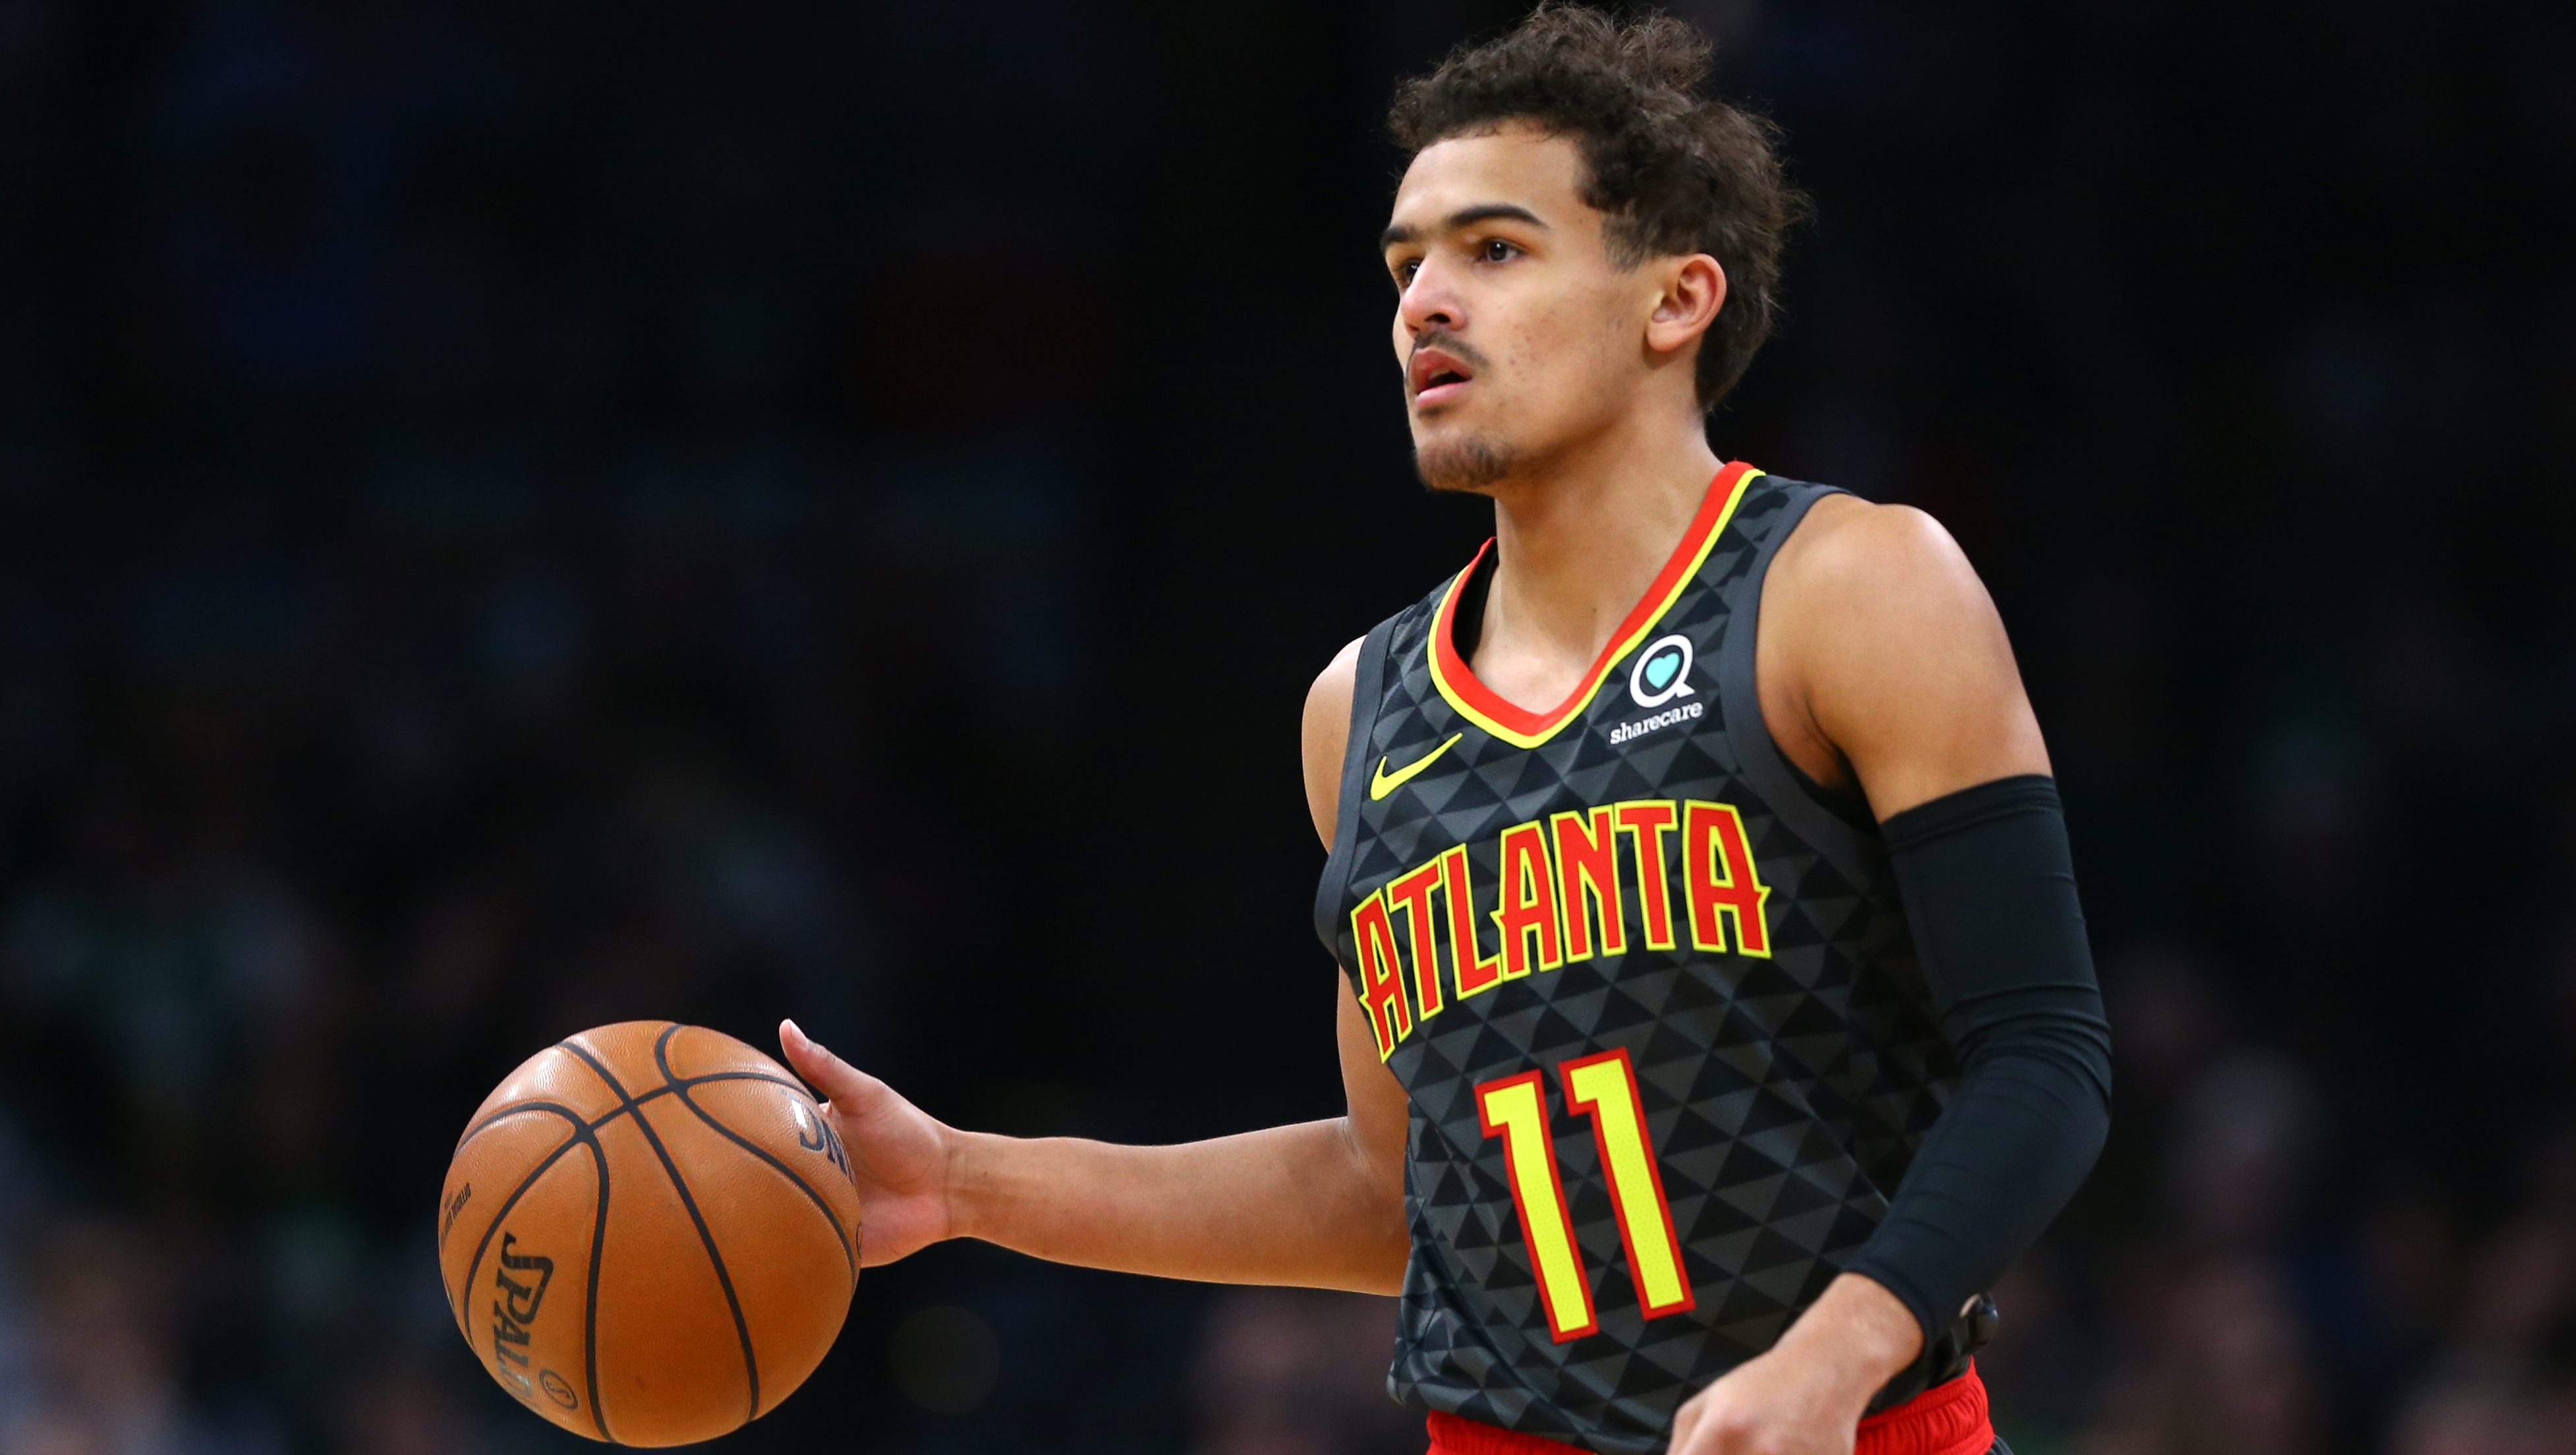 NBA Draft: Doncic traded for Young, Porter falls to No. 14 and what was up  with Trae Young's suit shorts?